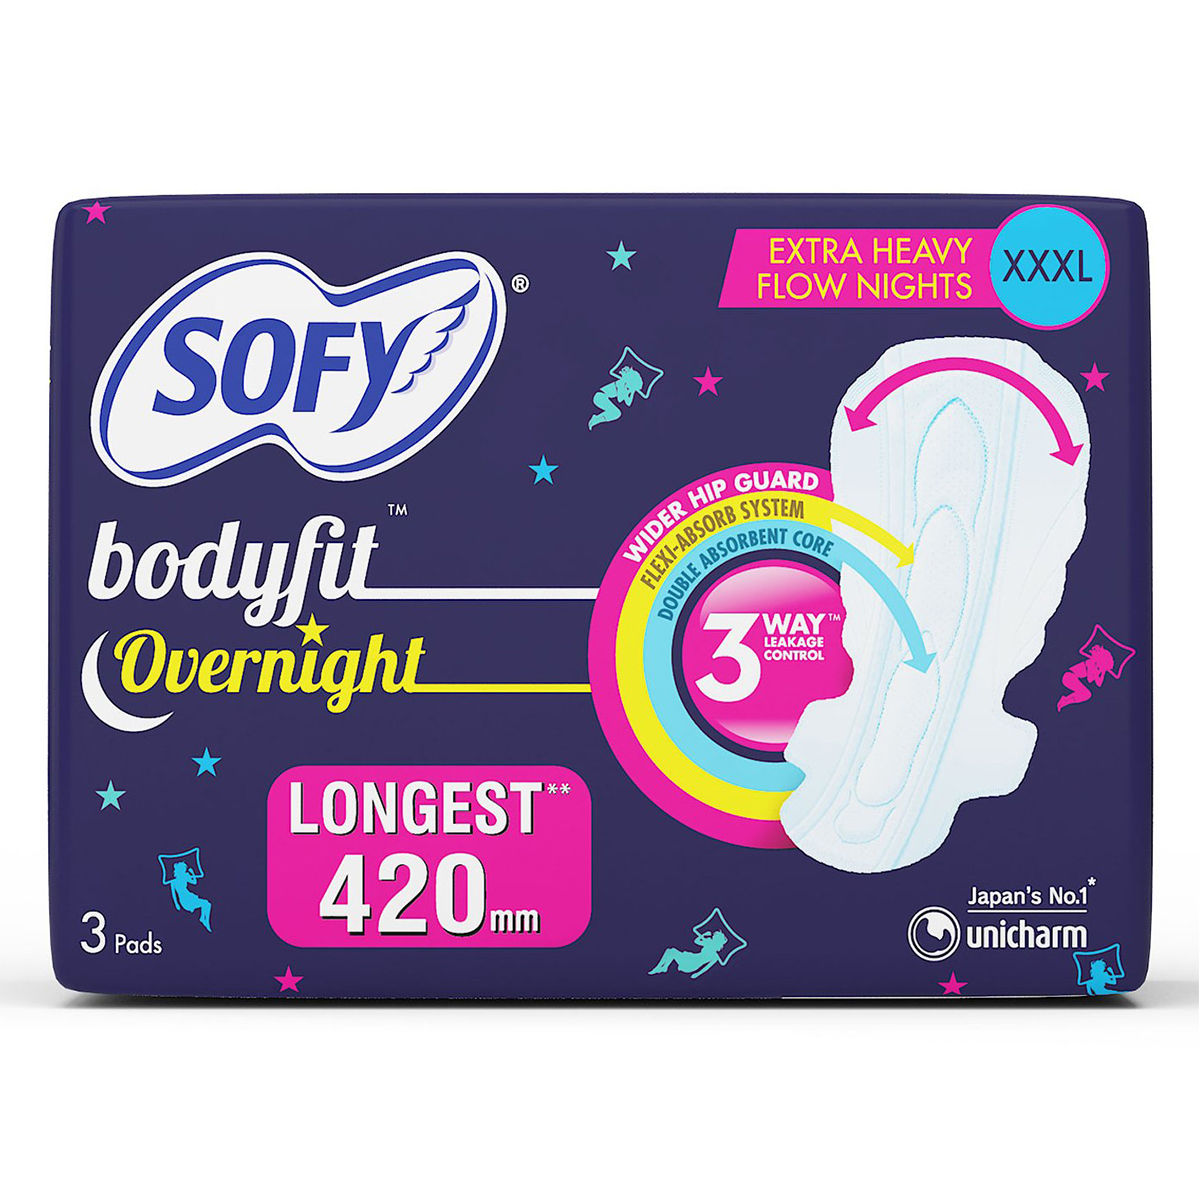 Sofy Bodyfit Overnight Sanitary Pads XXXL, 3 Count, Pack of 1 